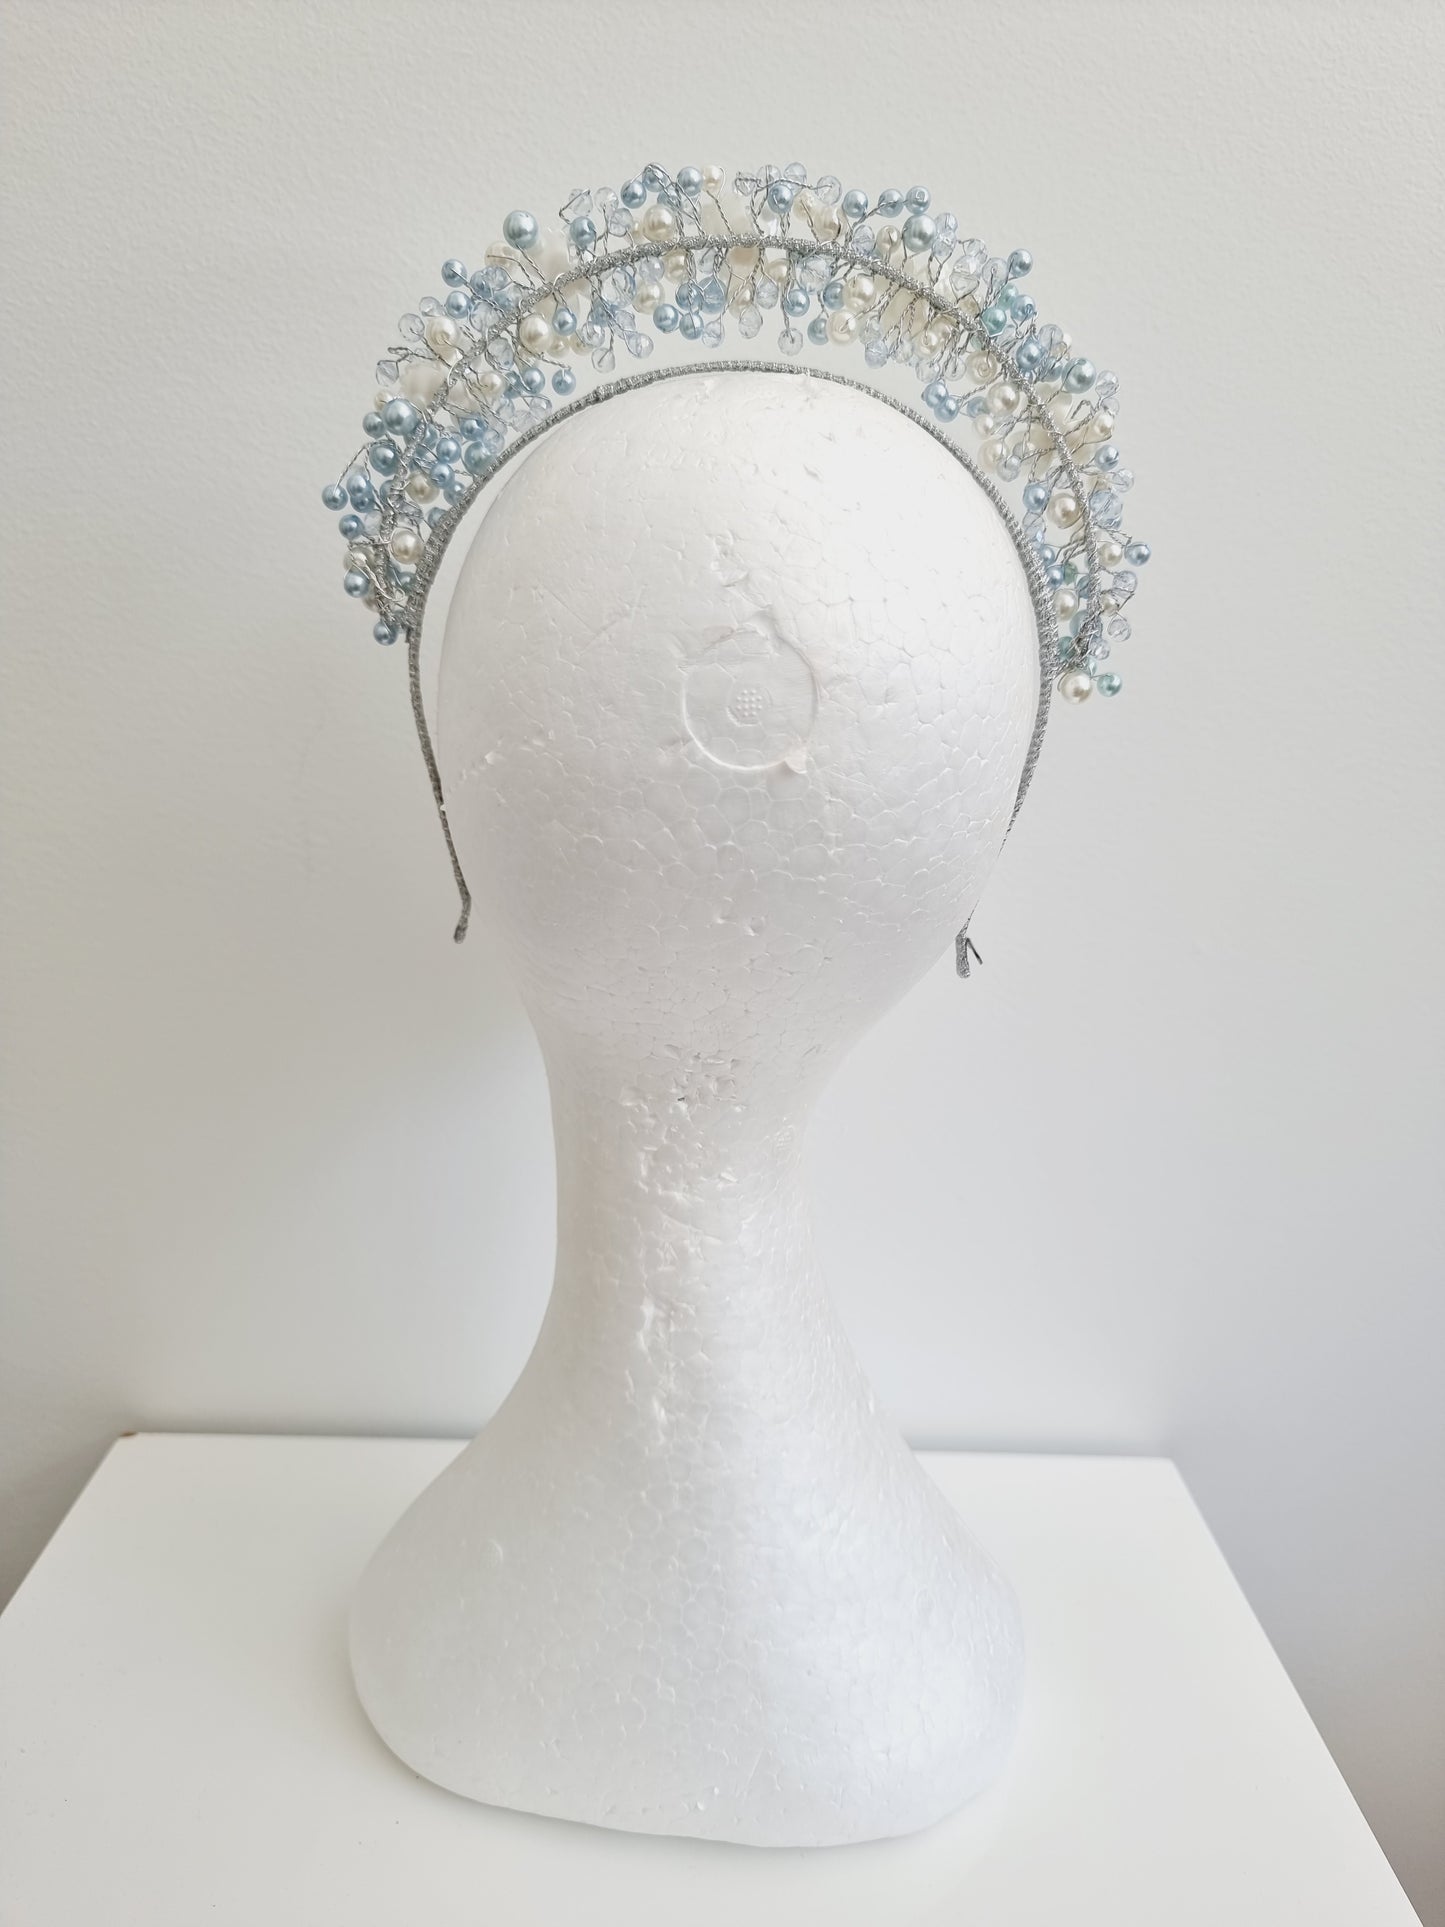 Miss Sienna. Womens pearl and crystal beaded headband fascinator in Pale Blue / white